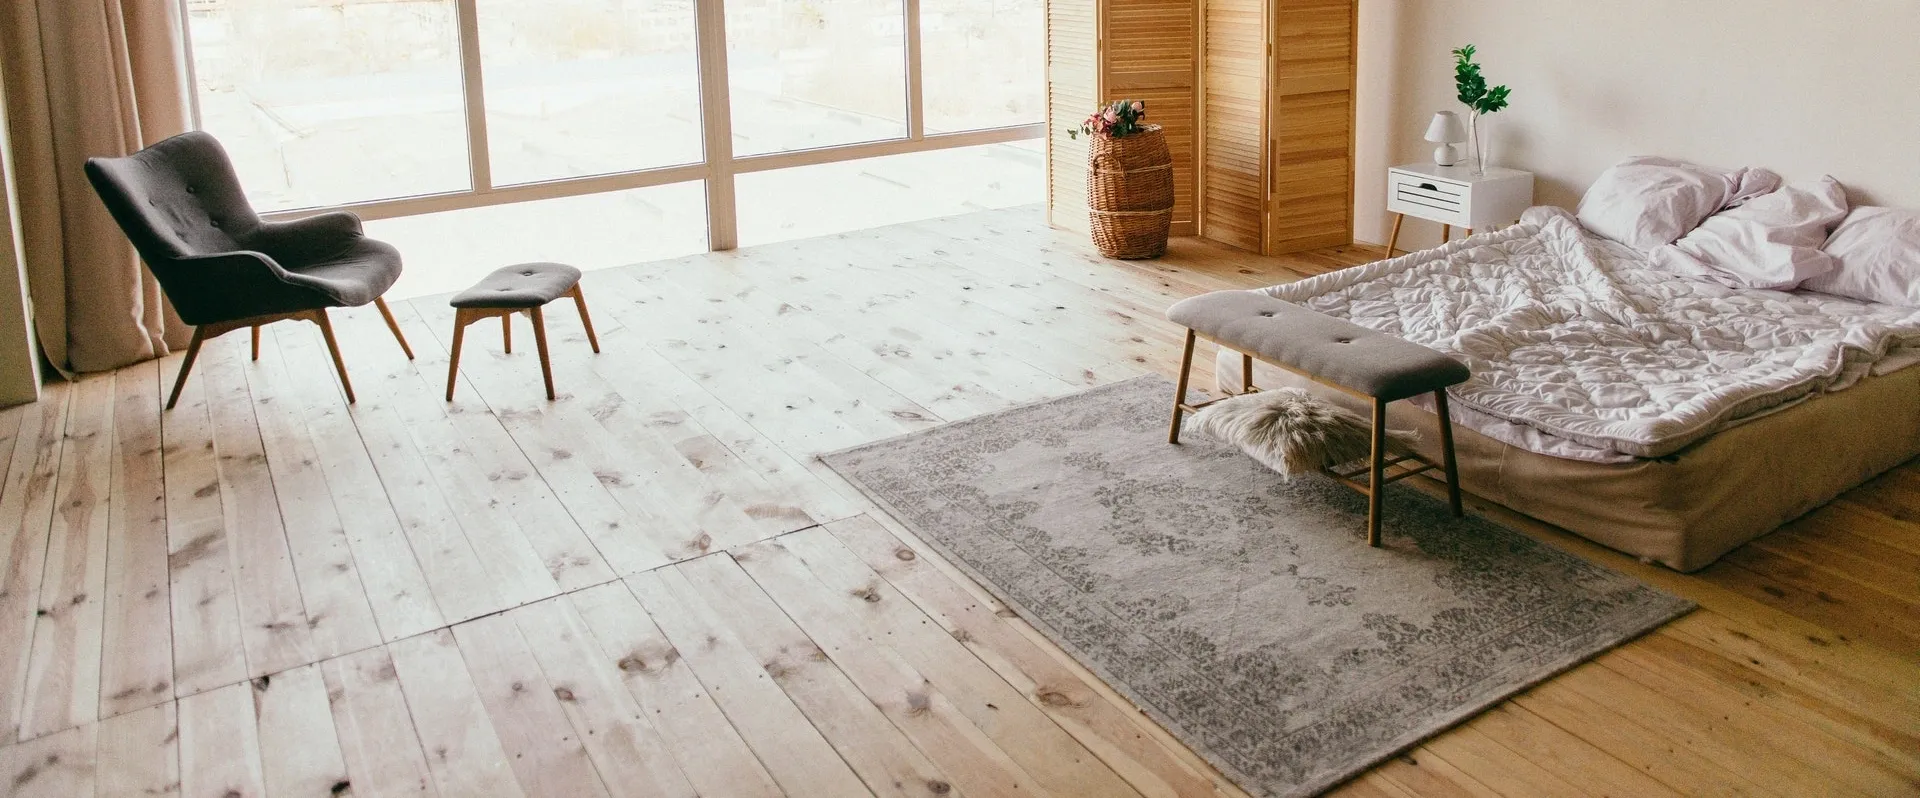 A room with wooden floors and a rug.